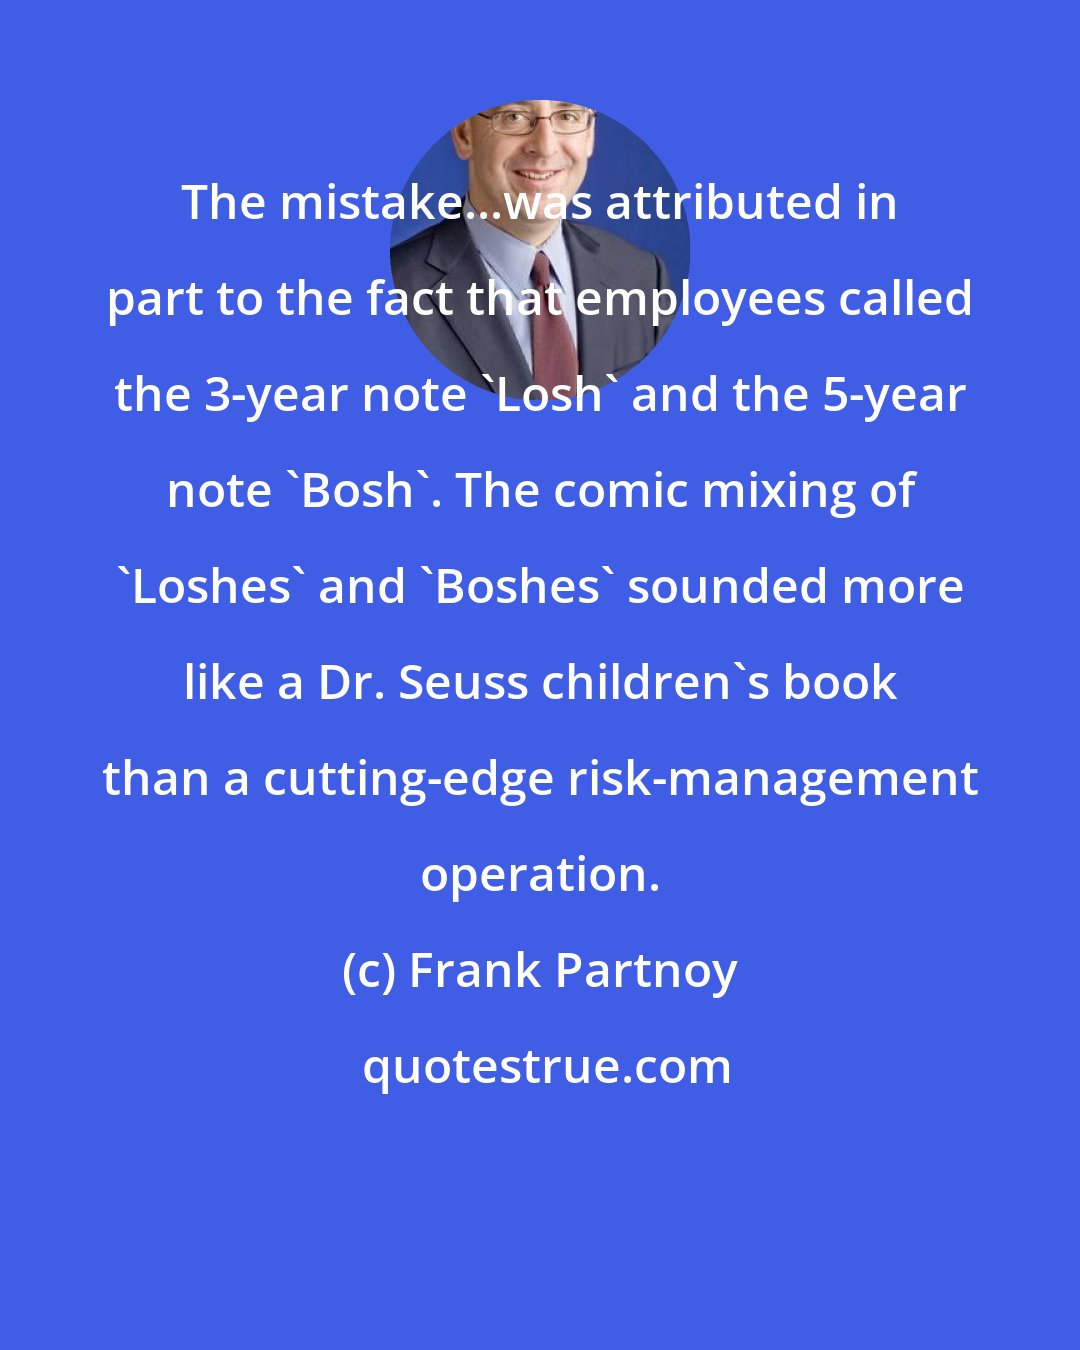 Frank Partnoy: The mistake...was attributed in part to the fact that employees called the 3-year note 'Losh' and the 5-year note 'Bosh'. The comic mixing of 'Loshes' and 'Boshes' sounded more like a Dr. Seuss children's book than a cutting-edge risk-management operation.